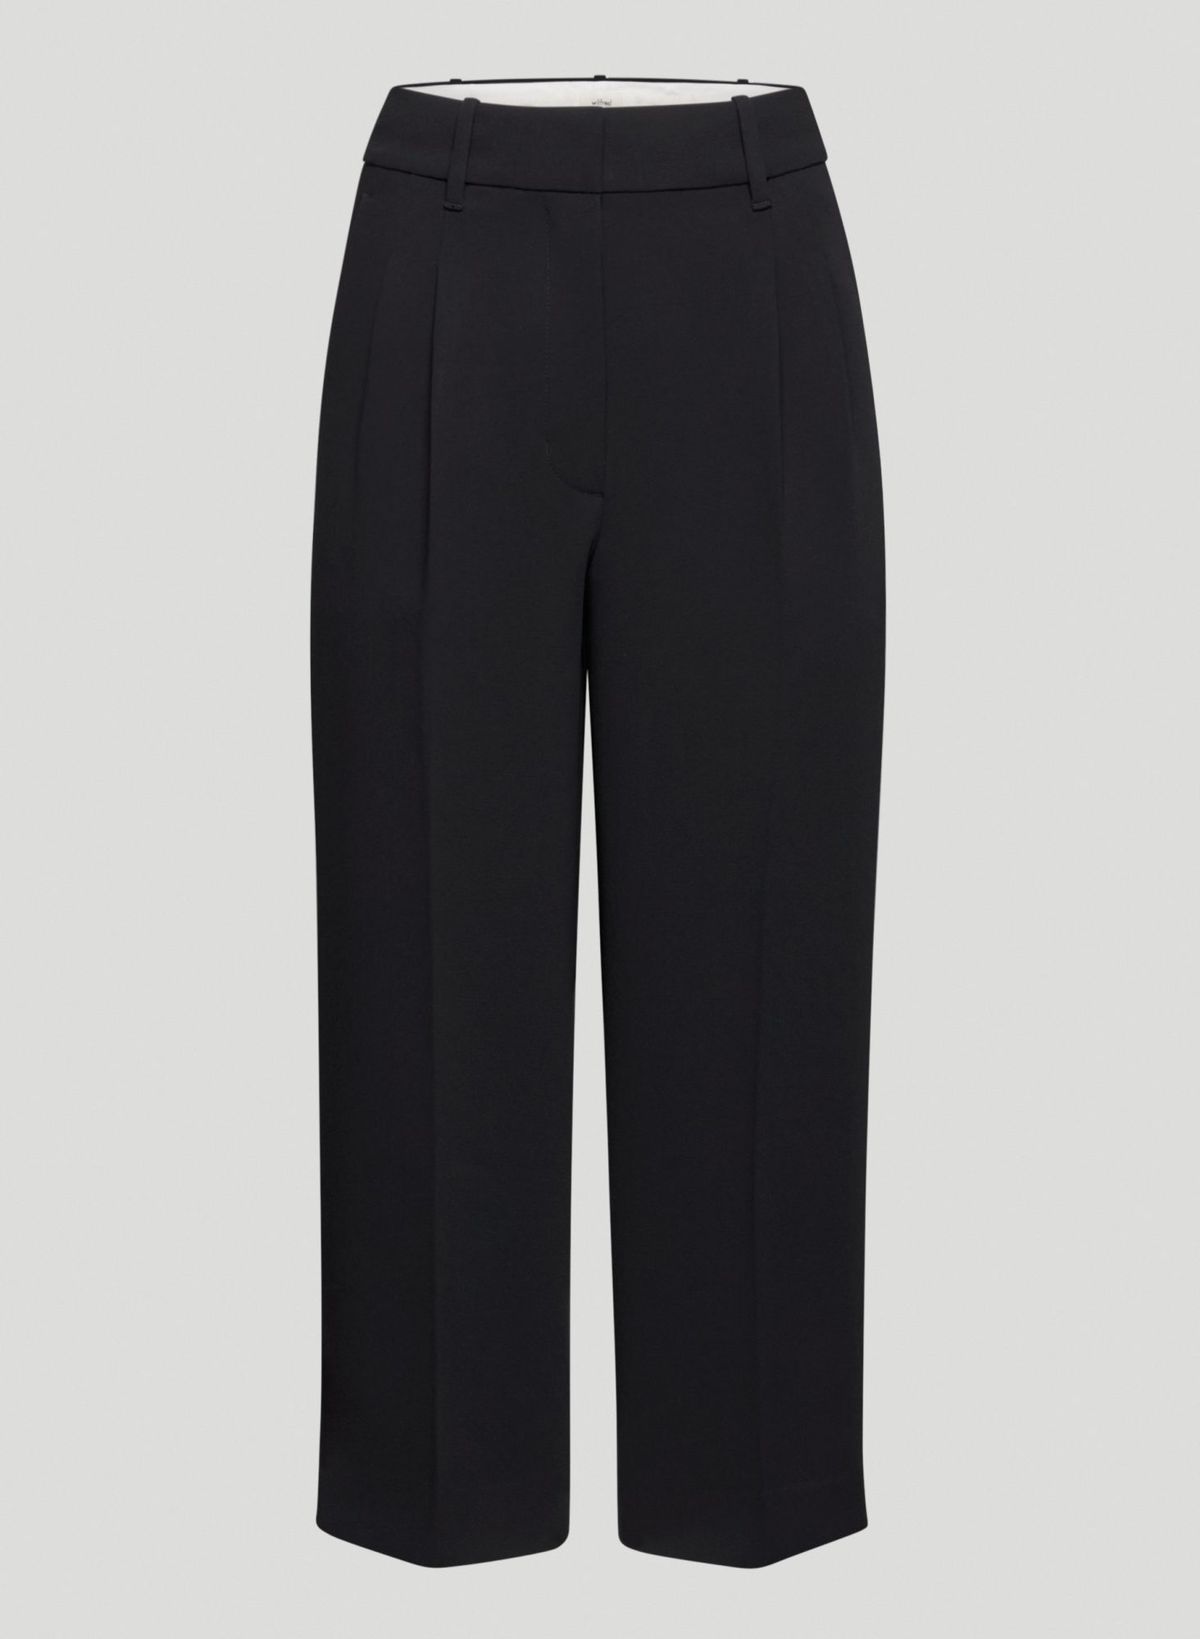 Aritzia Wilfred Effortless Cropped Pant